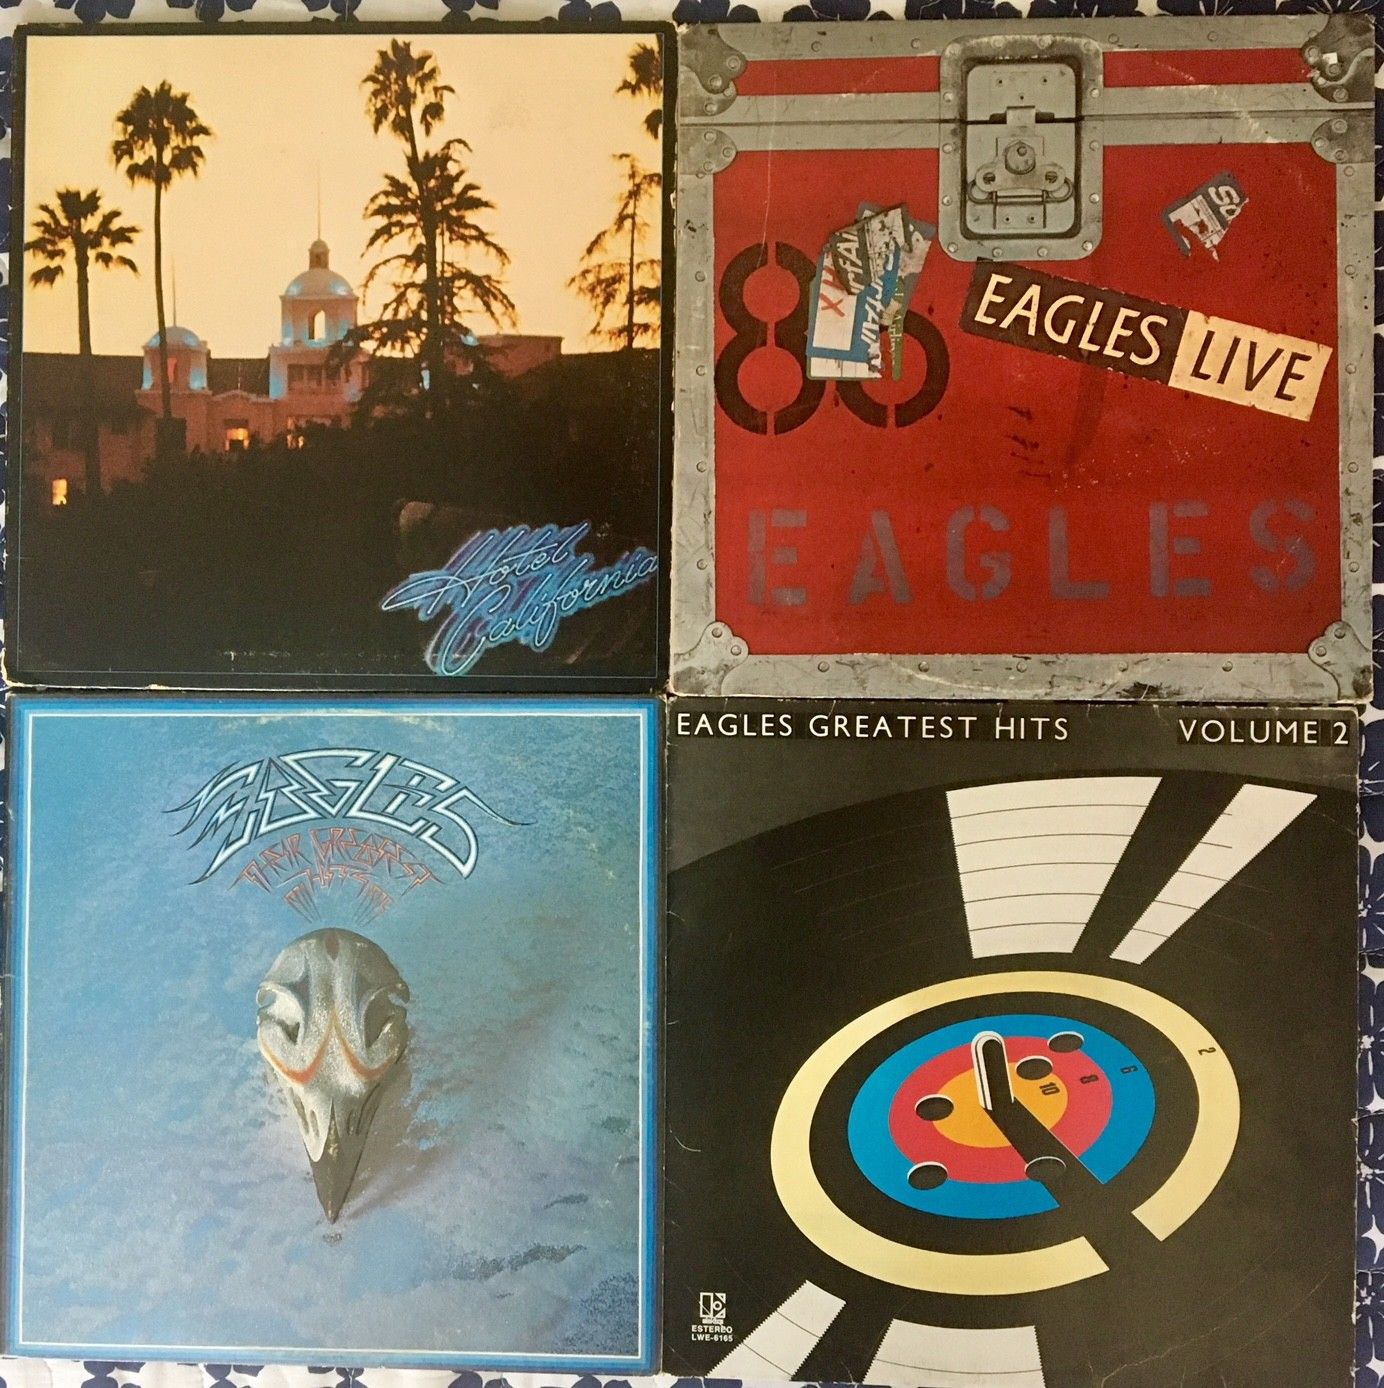  The Eagles - 4 Vinyl LP Records - Hotel  California/Live/Greatest Hits 1 & 2 - EX - auction details